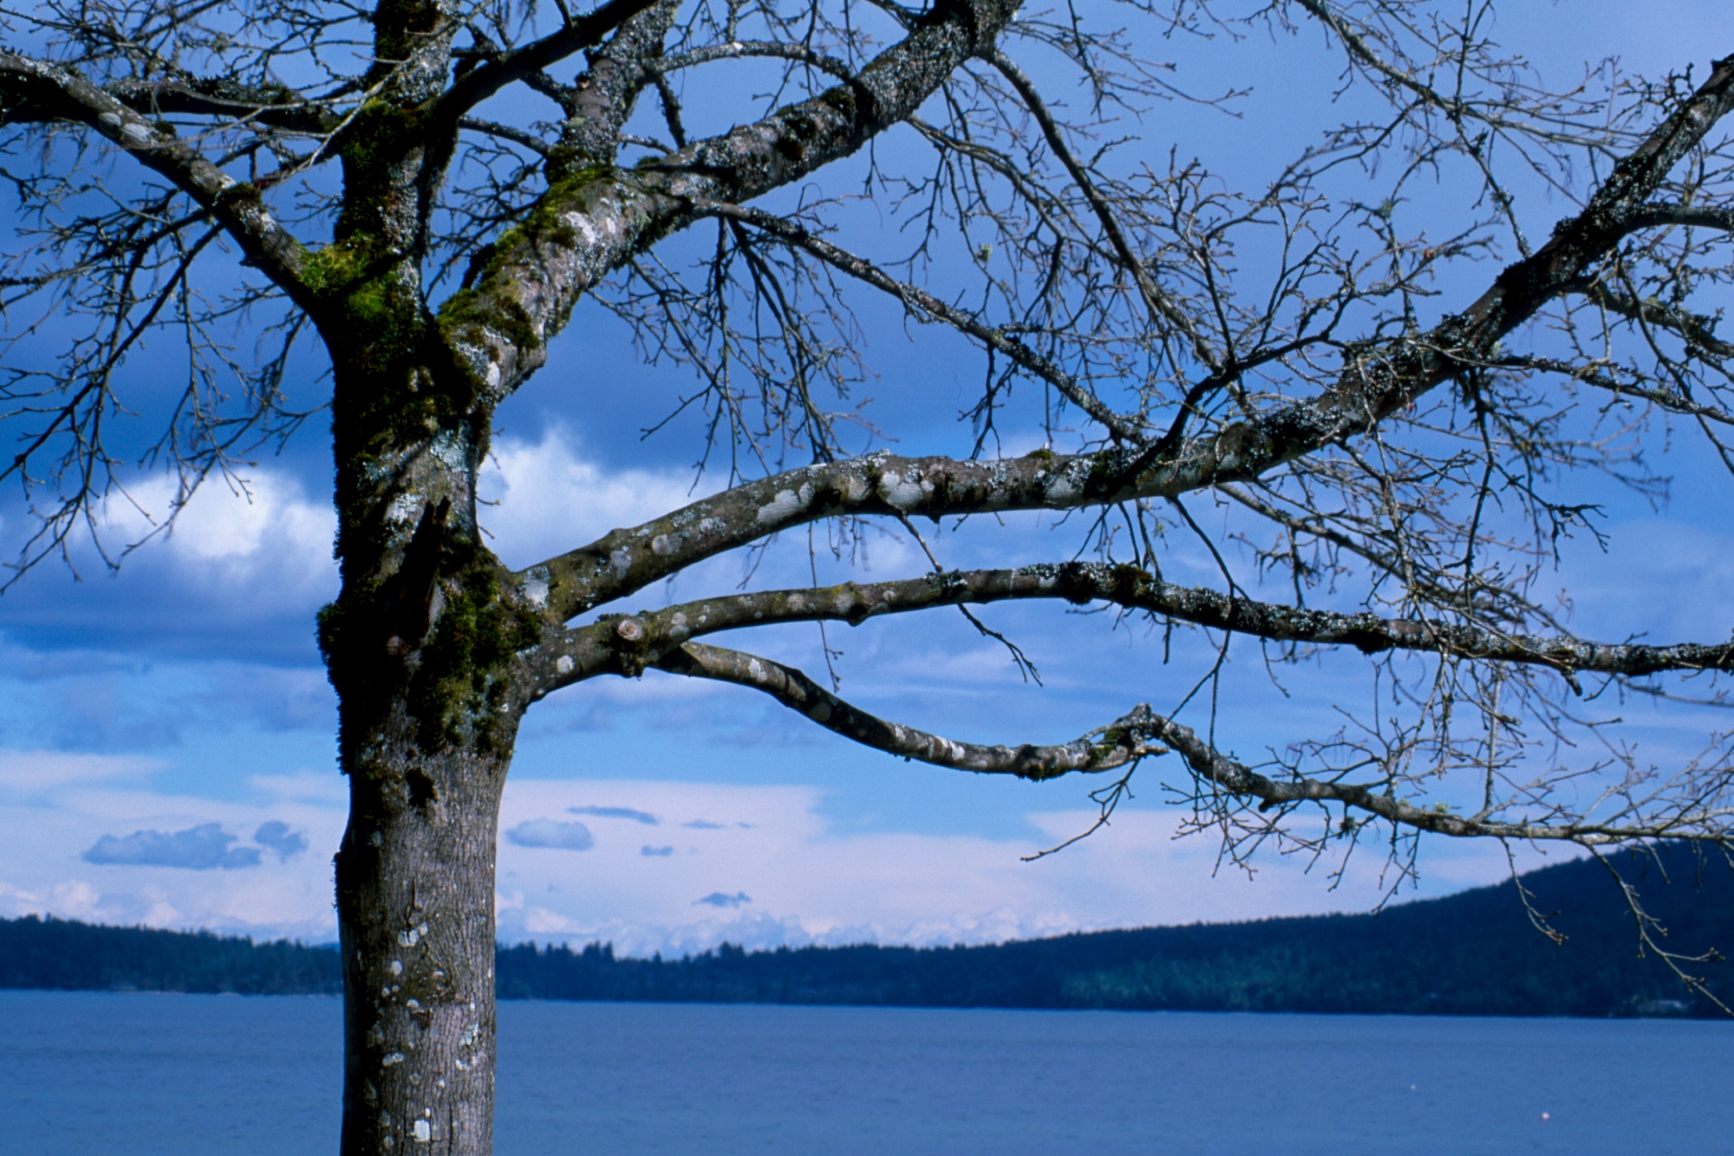 Close up of tree with the lake and mountains in the background.